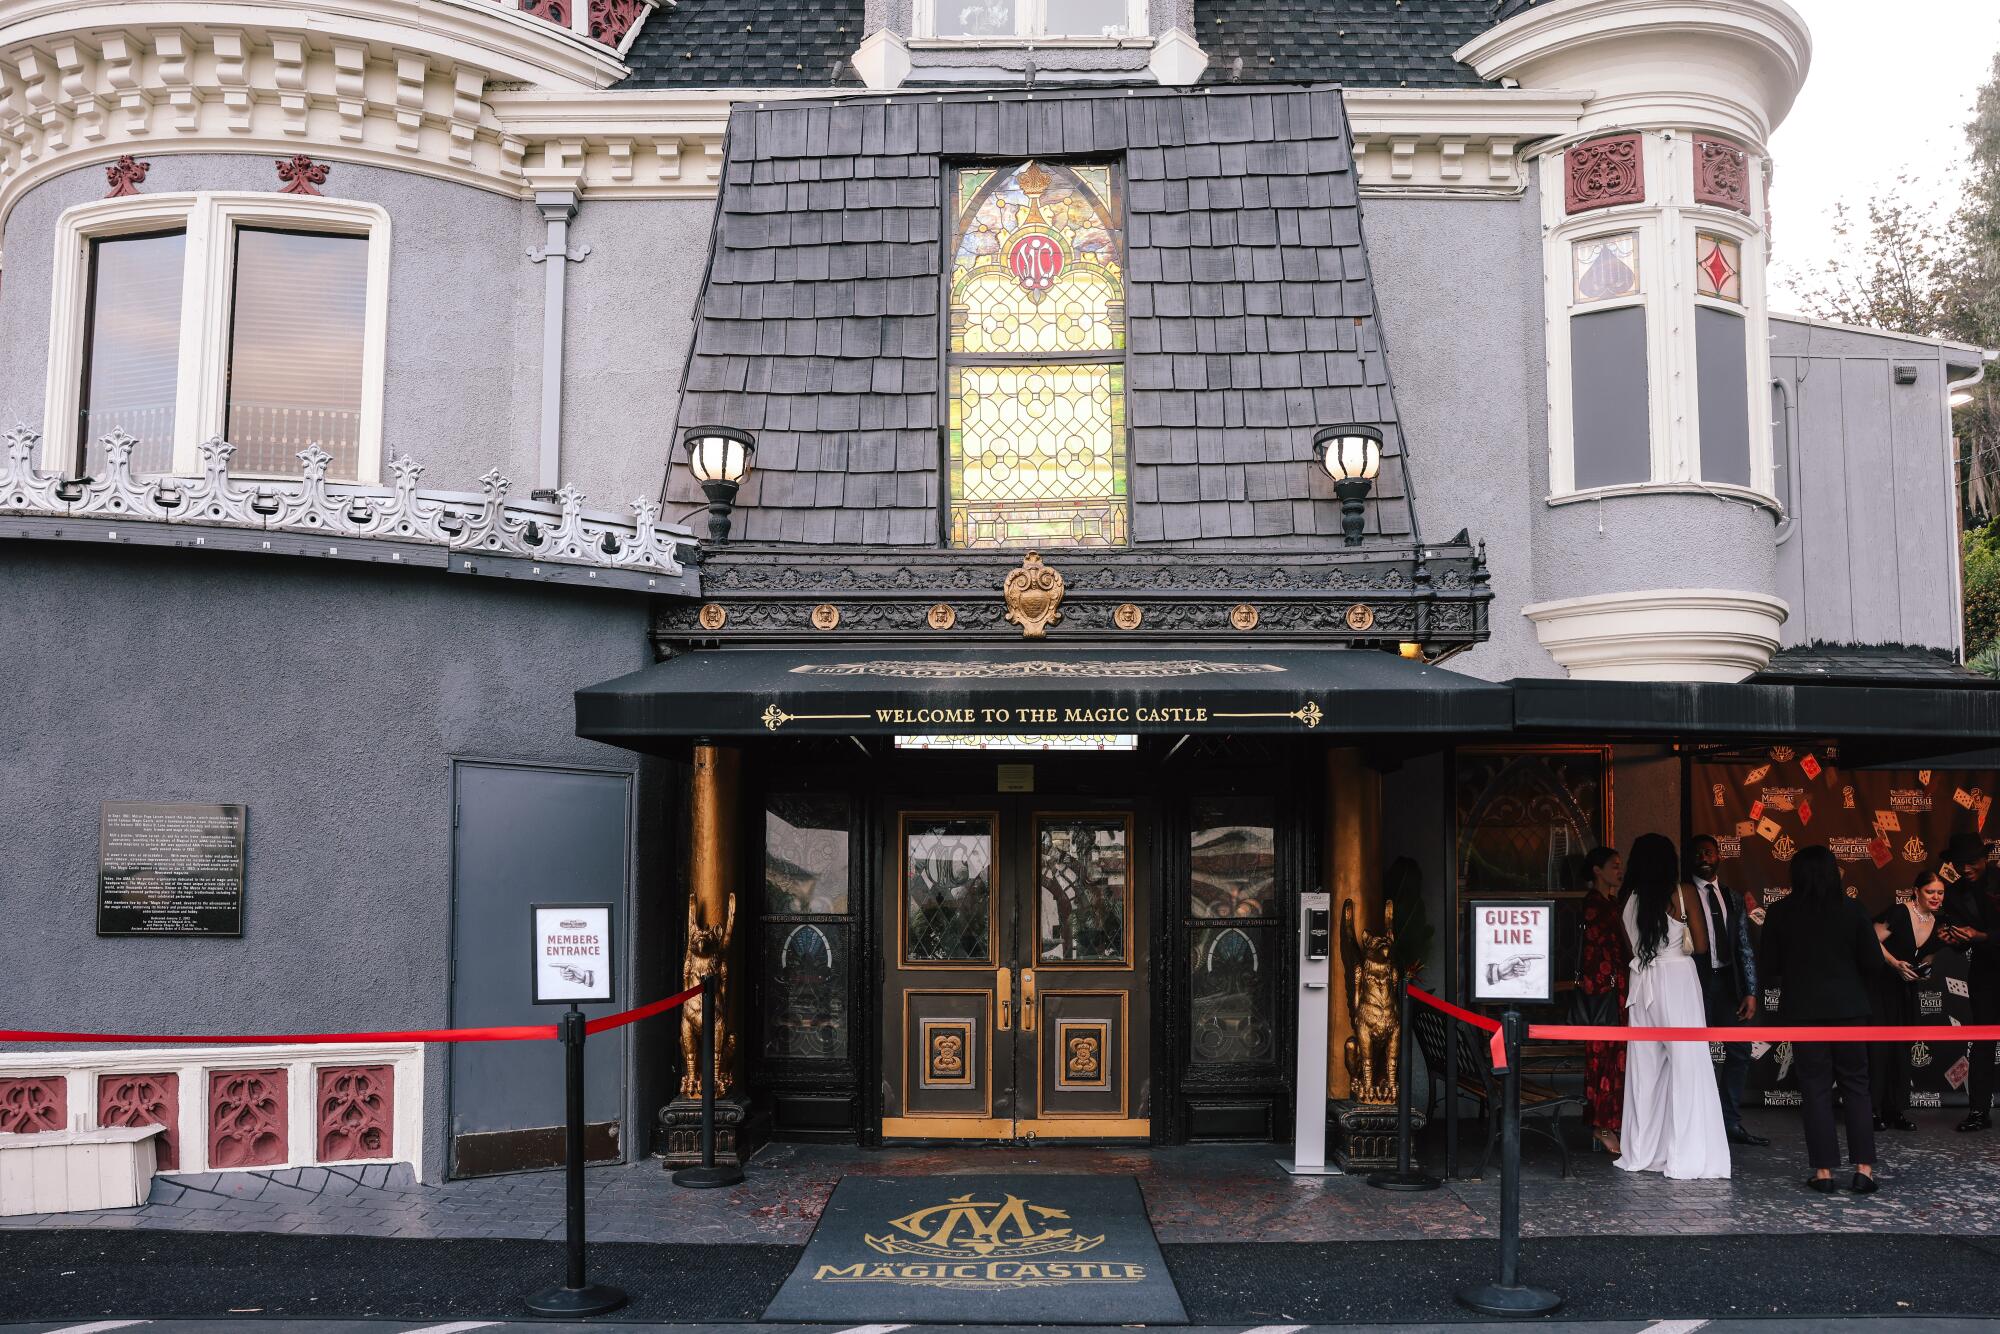 The entrance to the Magic Castle in Hollywood.